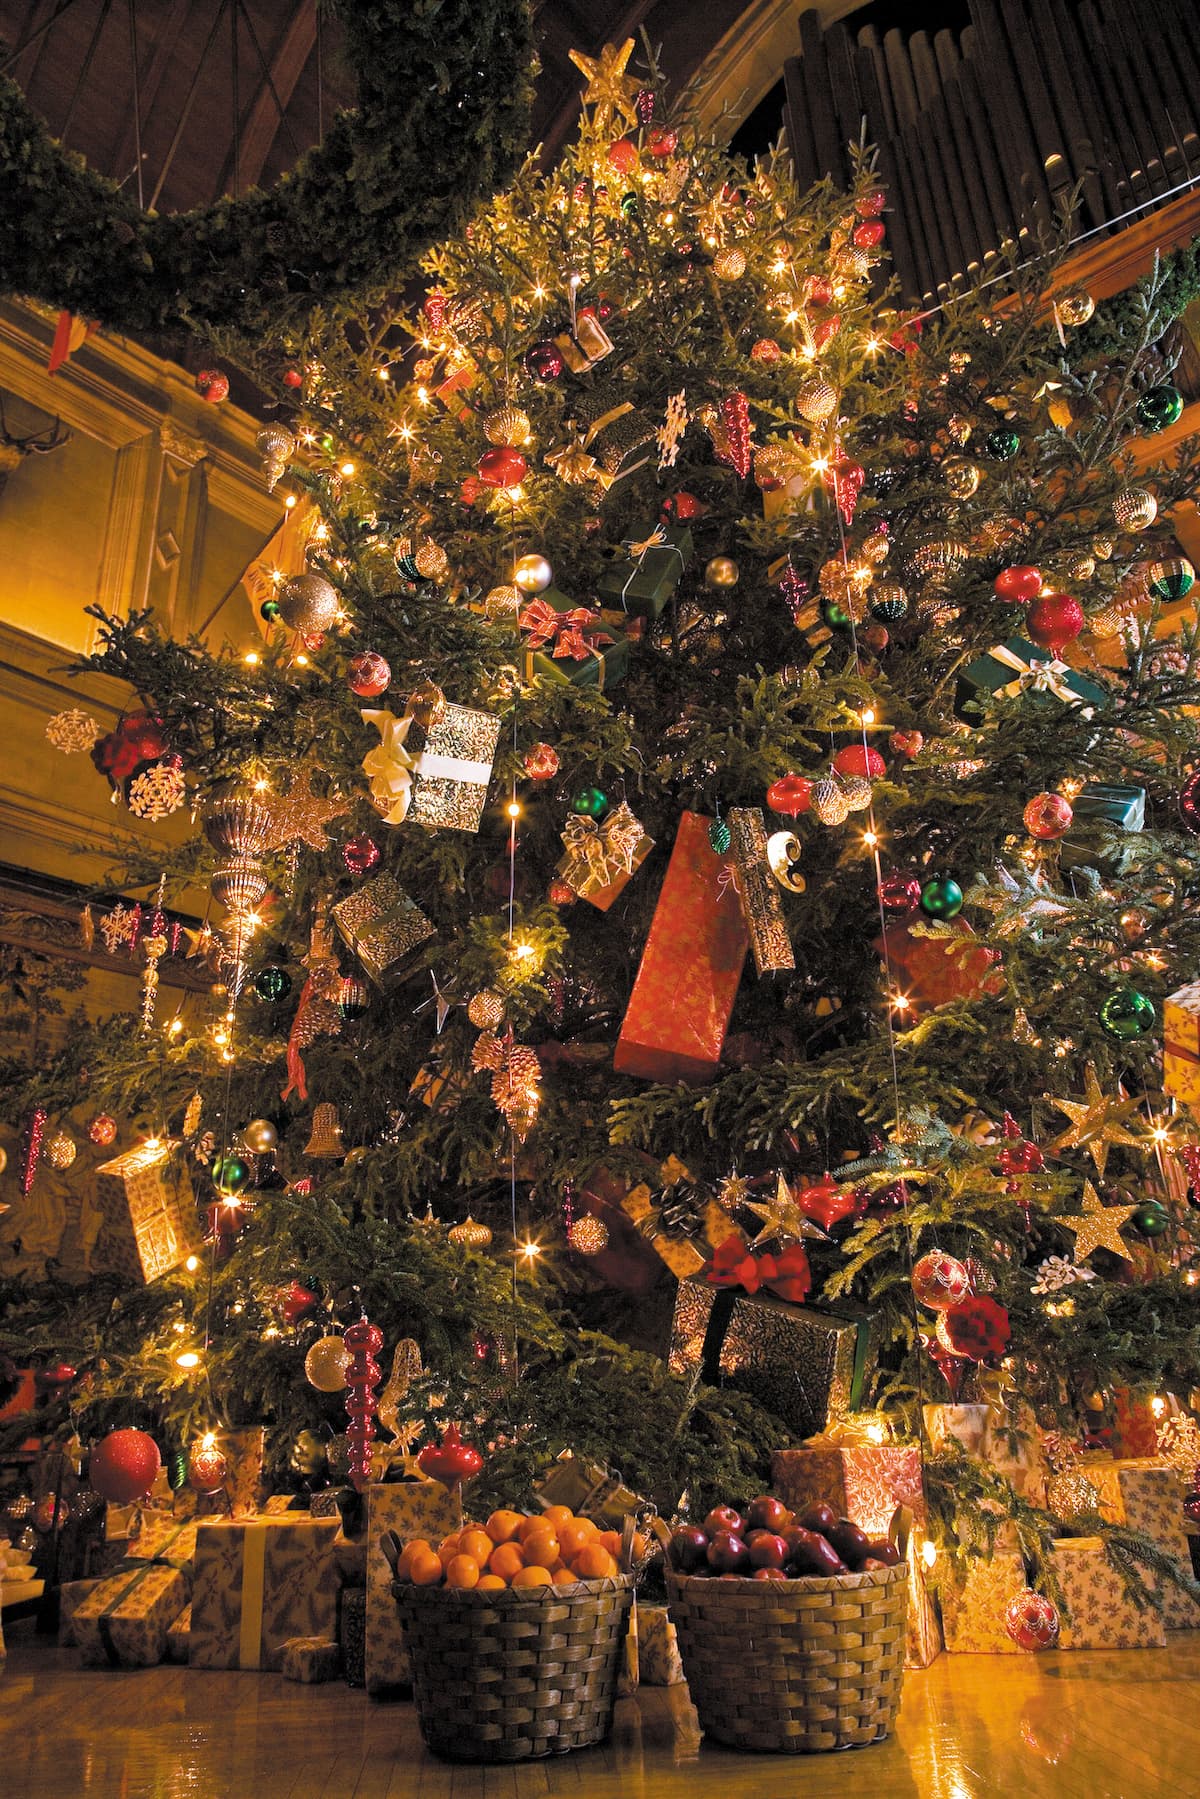 A live Christmas tree decorated with old fashioned ornaments at Biltmore Estate